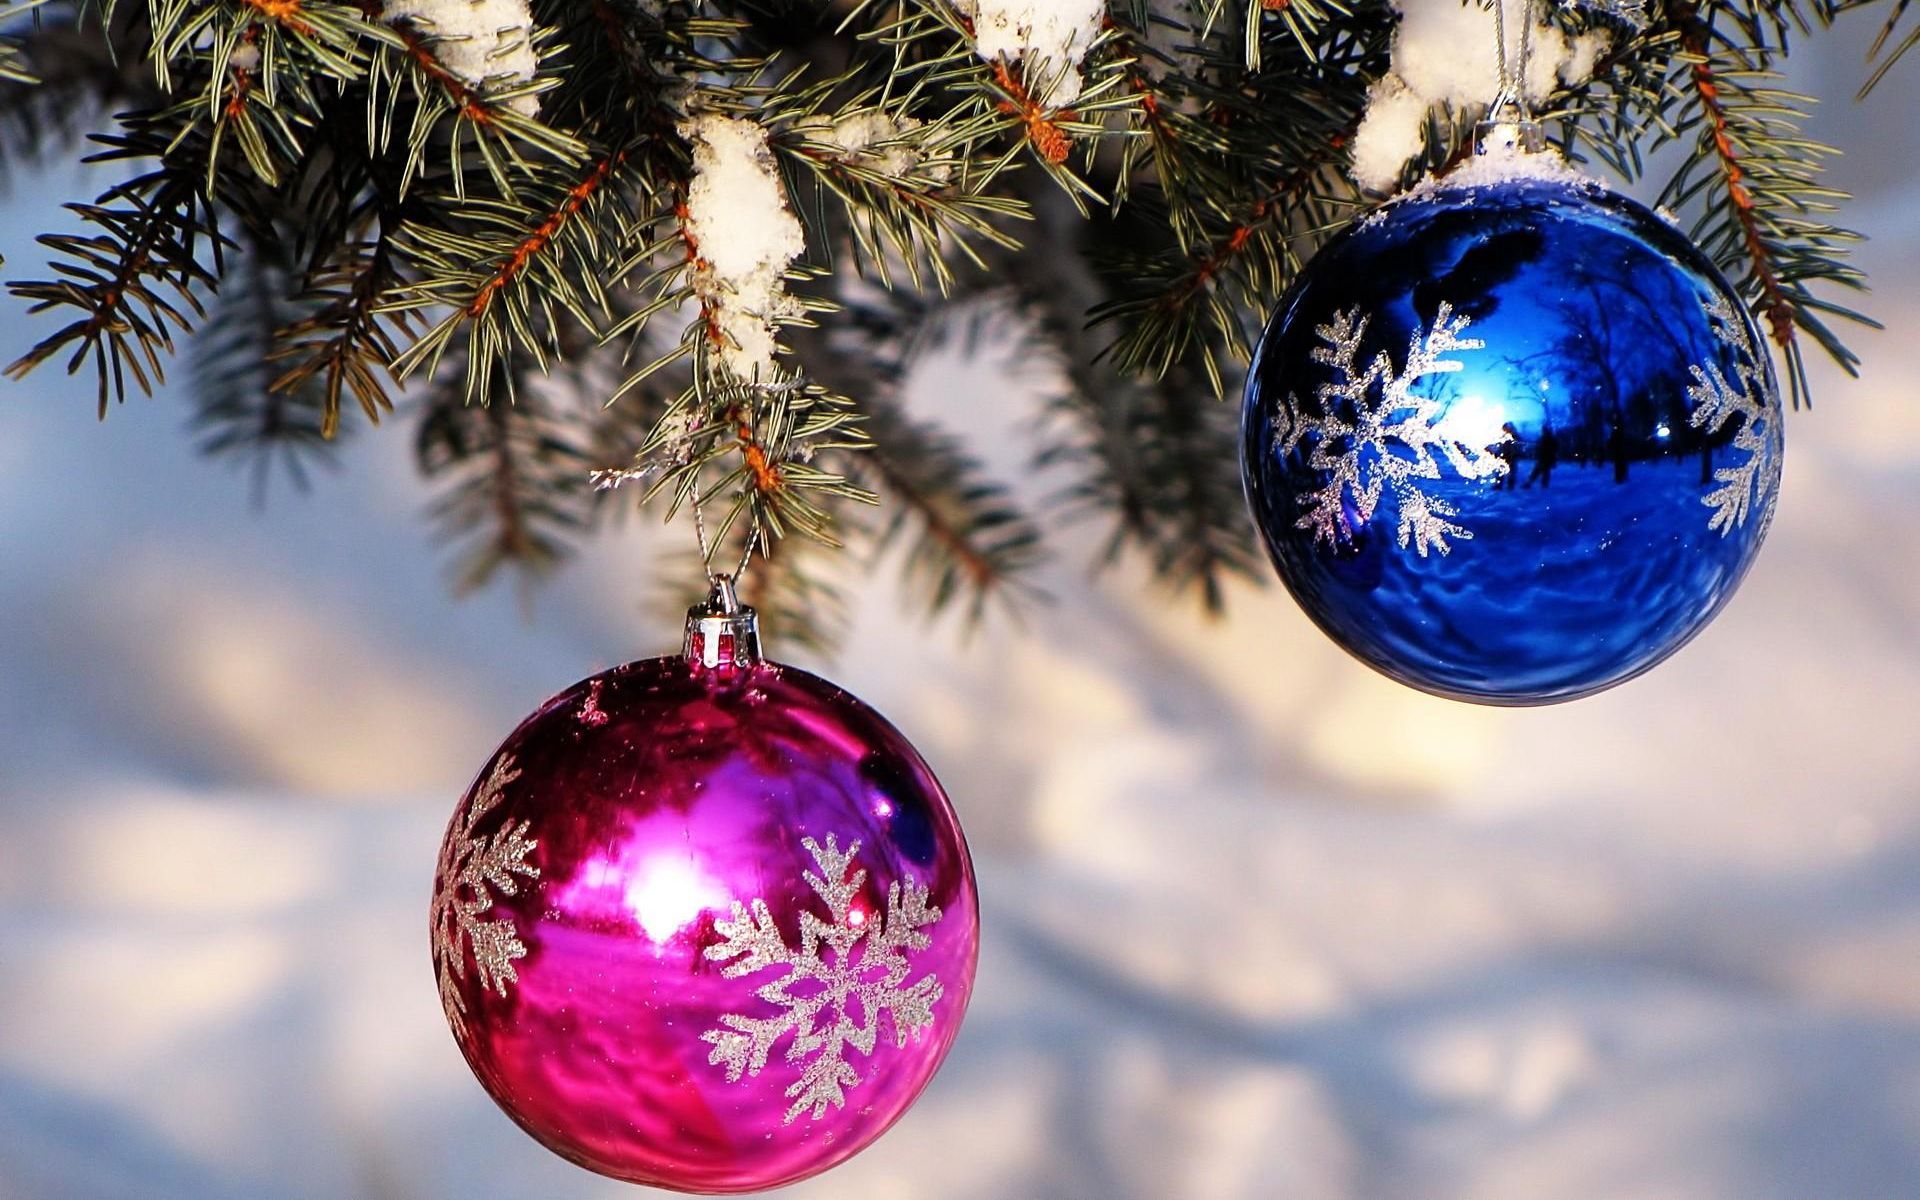 Download wallpaper 1920x1200 christmas decorations, balloons, blue, pink, spruce, snow widescreen 16:10 HD background